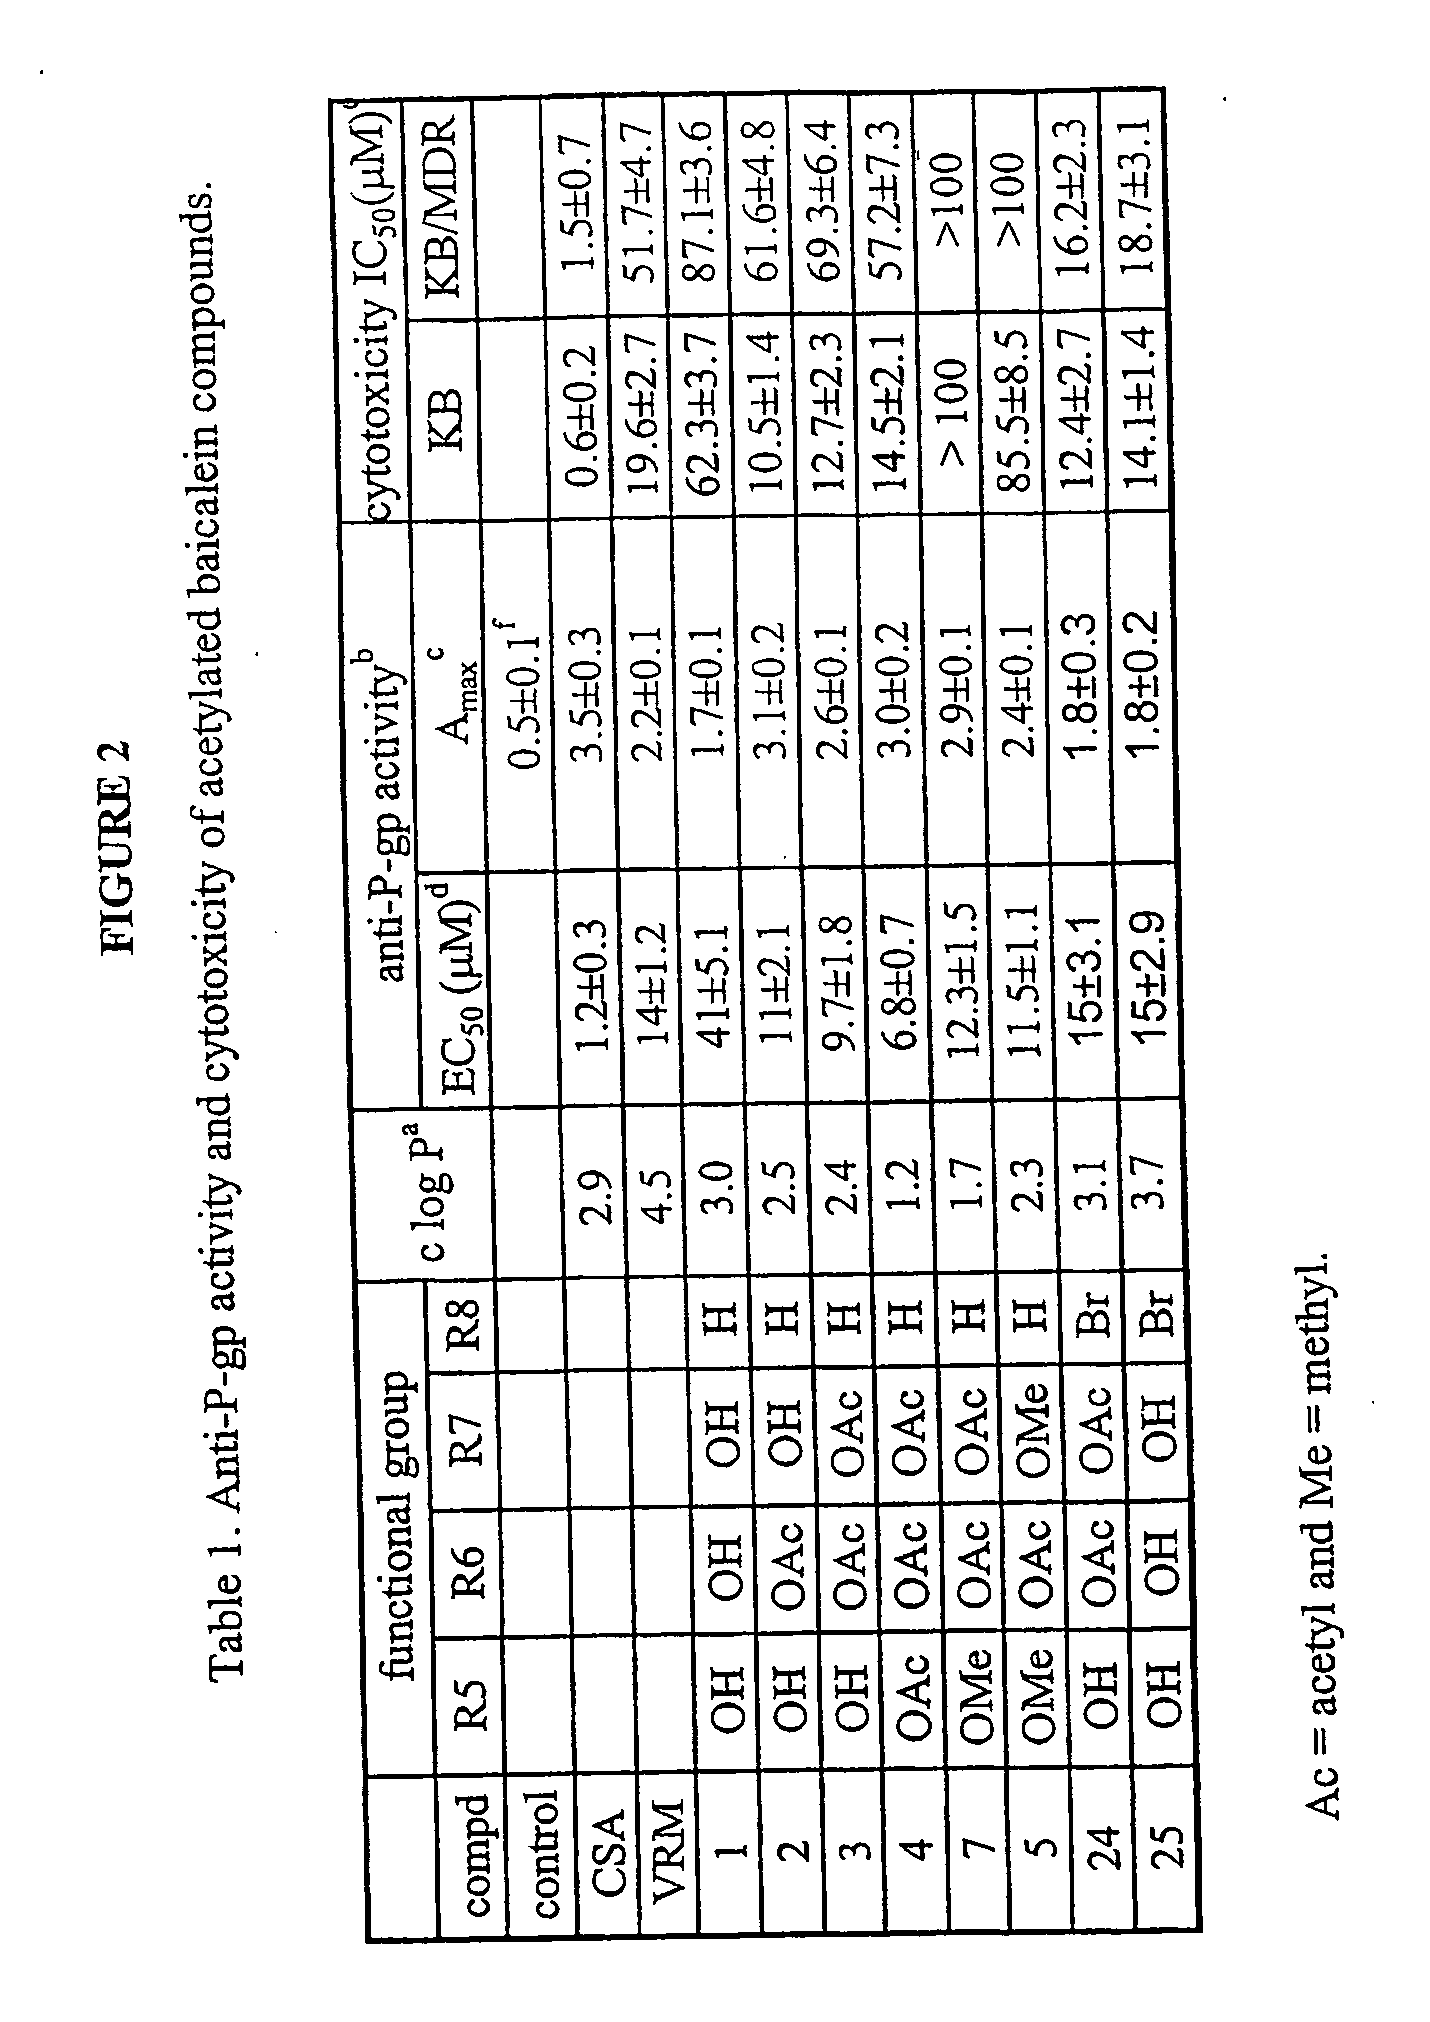 Compounds and methods to increase anti-p-glycoprotein activity of baicalein by alkylation on the a ring